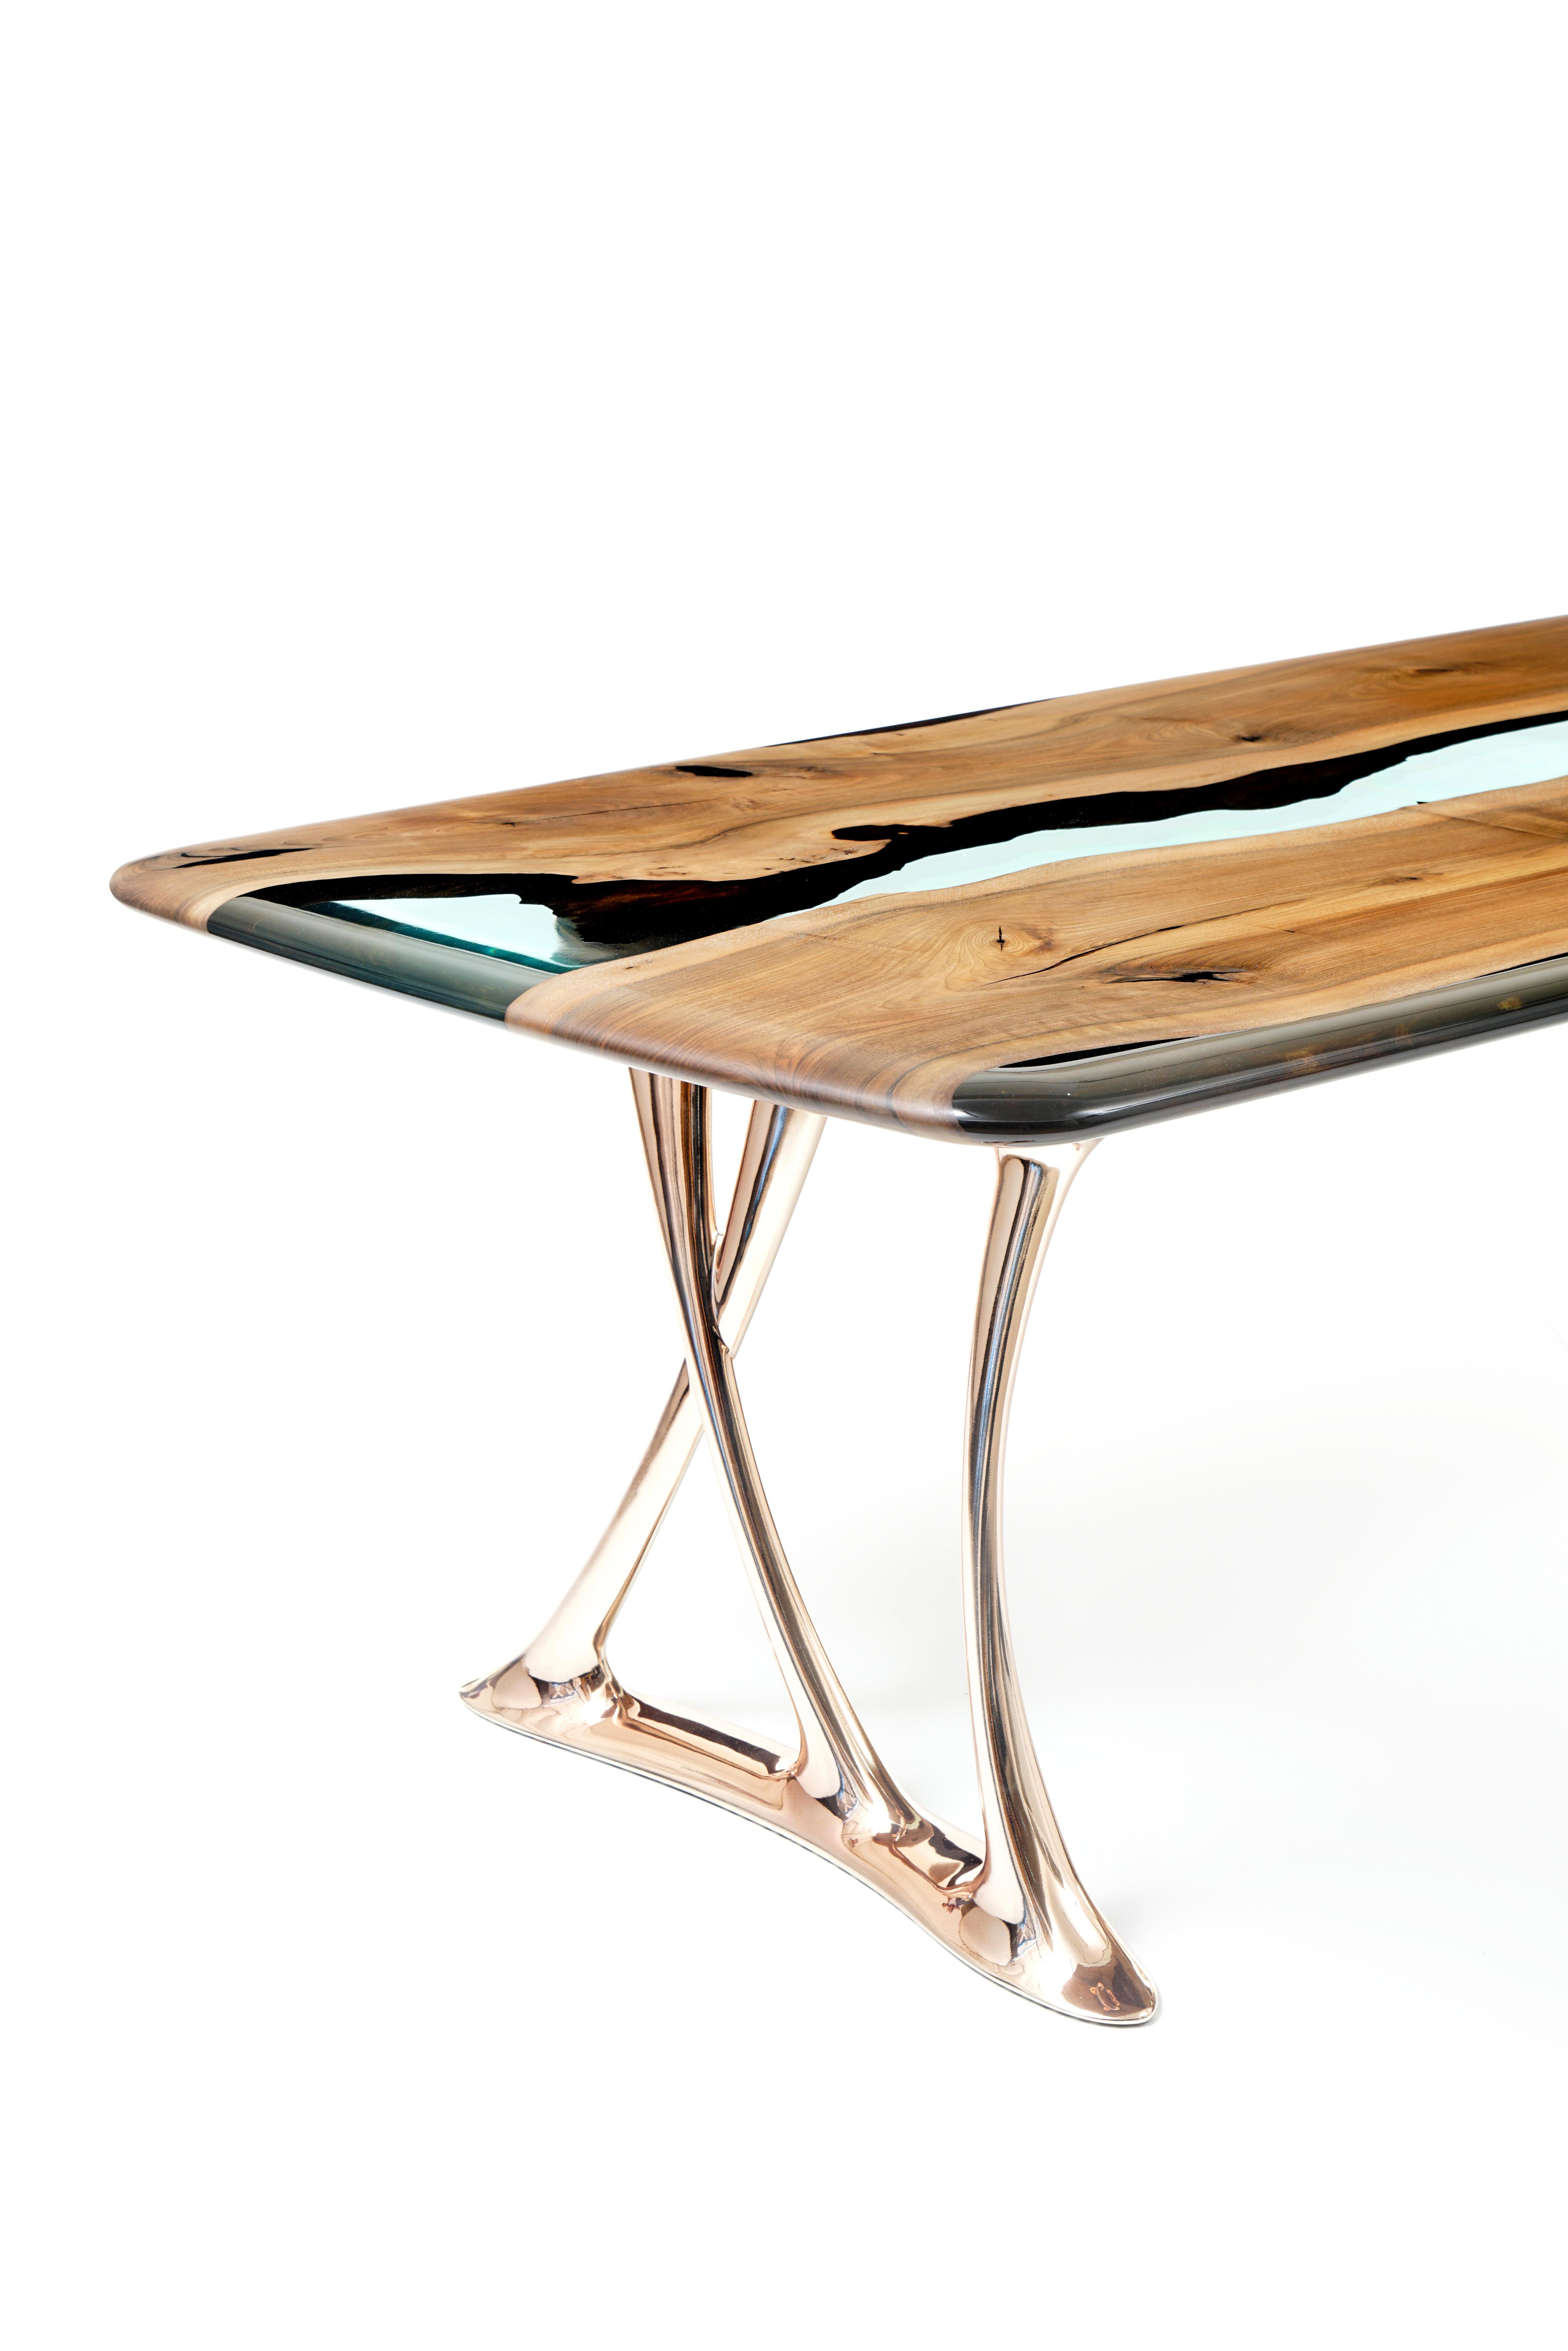 Mid-Century Modern Urbane Epoxy Resin Dining Table with Sand Casted Aluminum Rose Gold Base For Sale